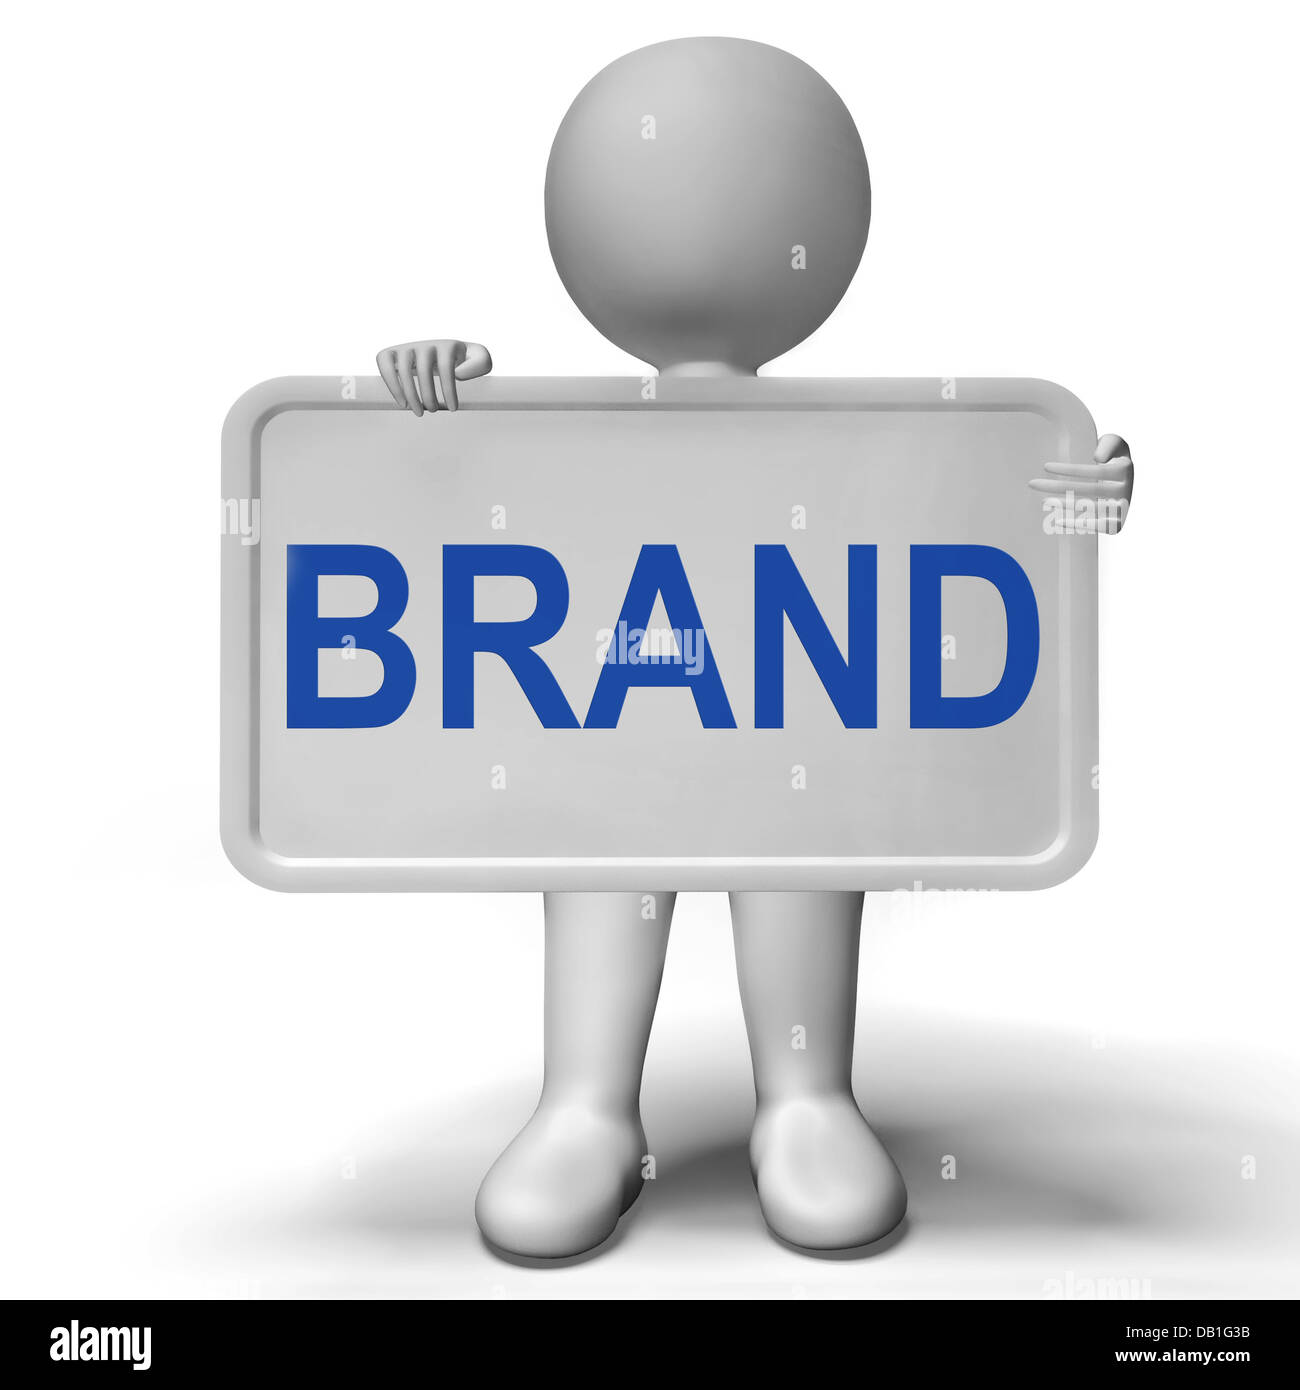 Brand Sign Showing Branding And Company Identity Stock Photo